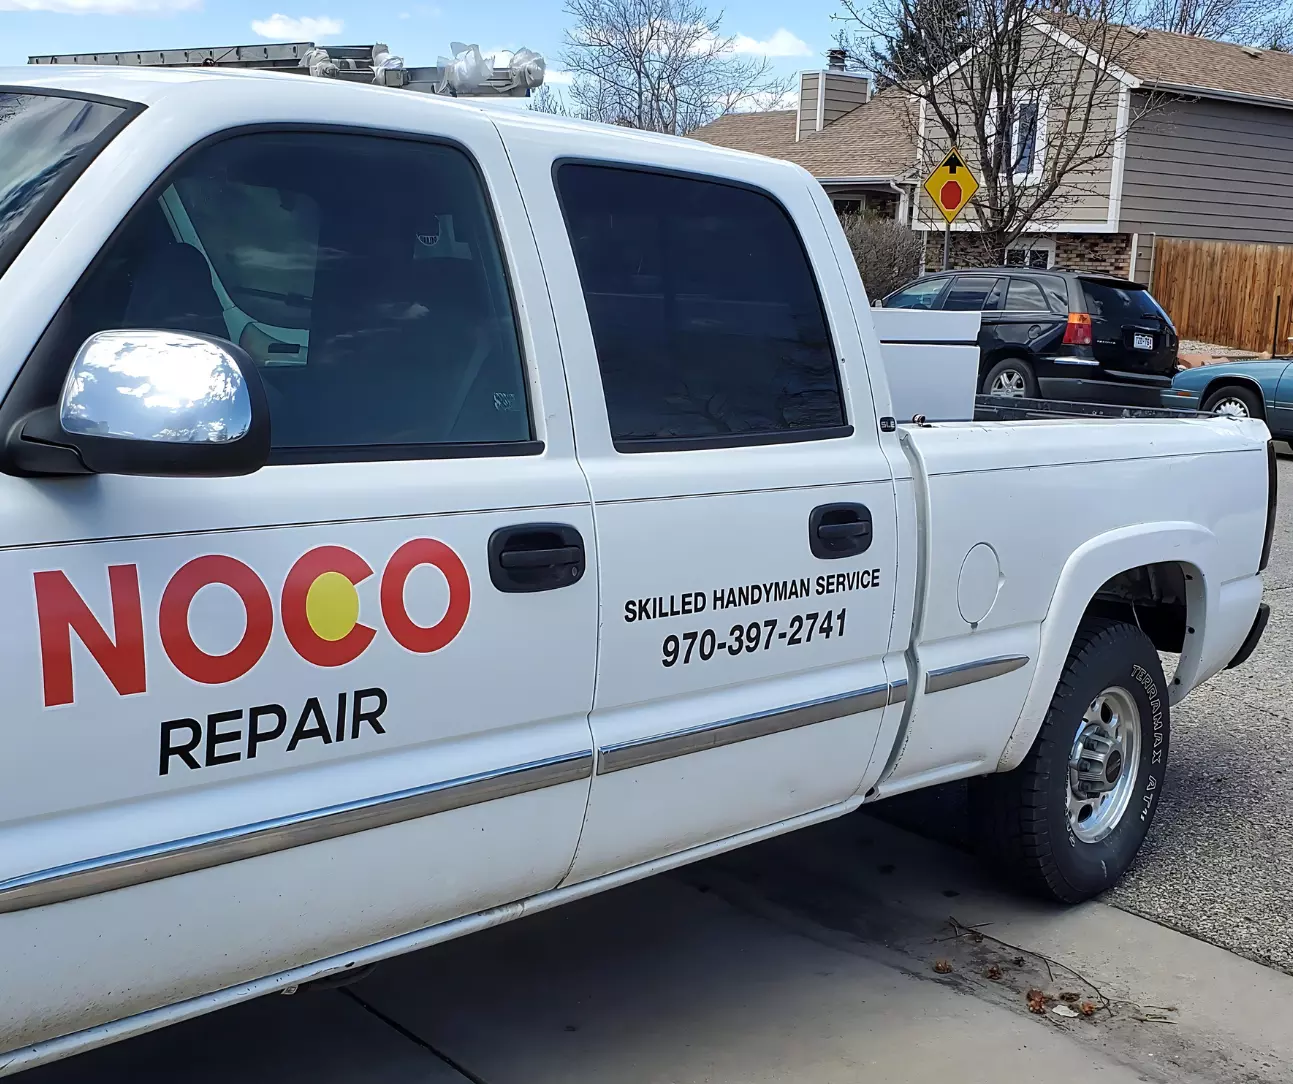 Why Choose NOCO Repair for Your Home Improvement